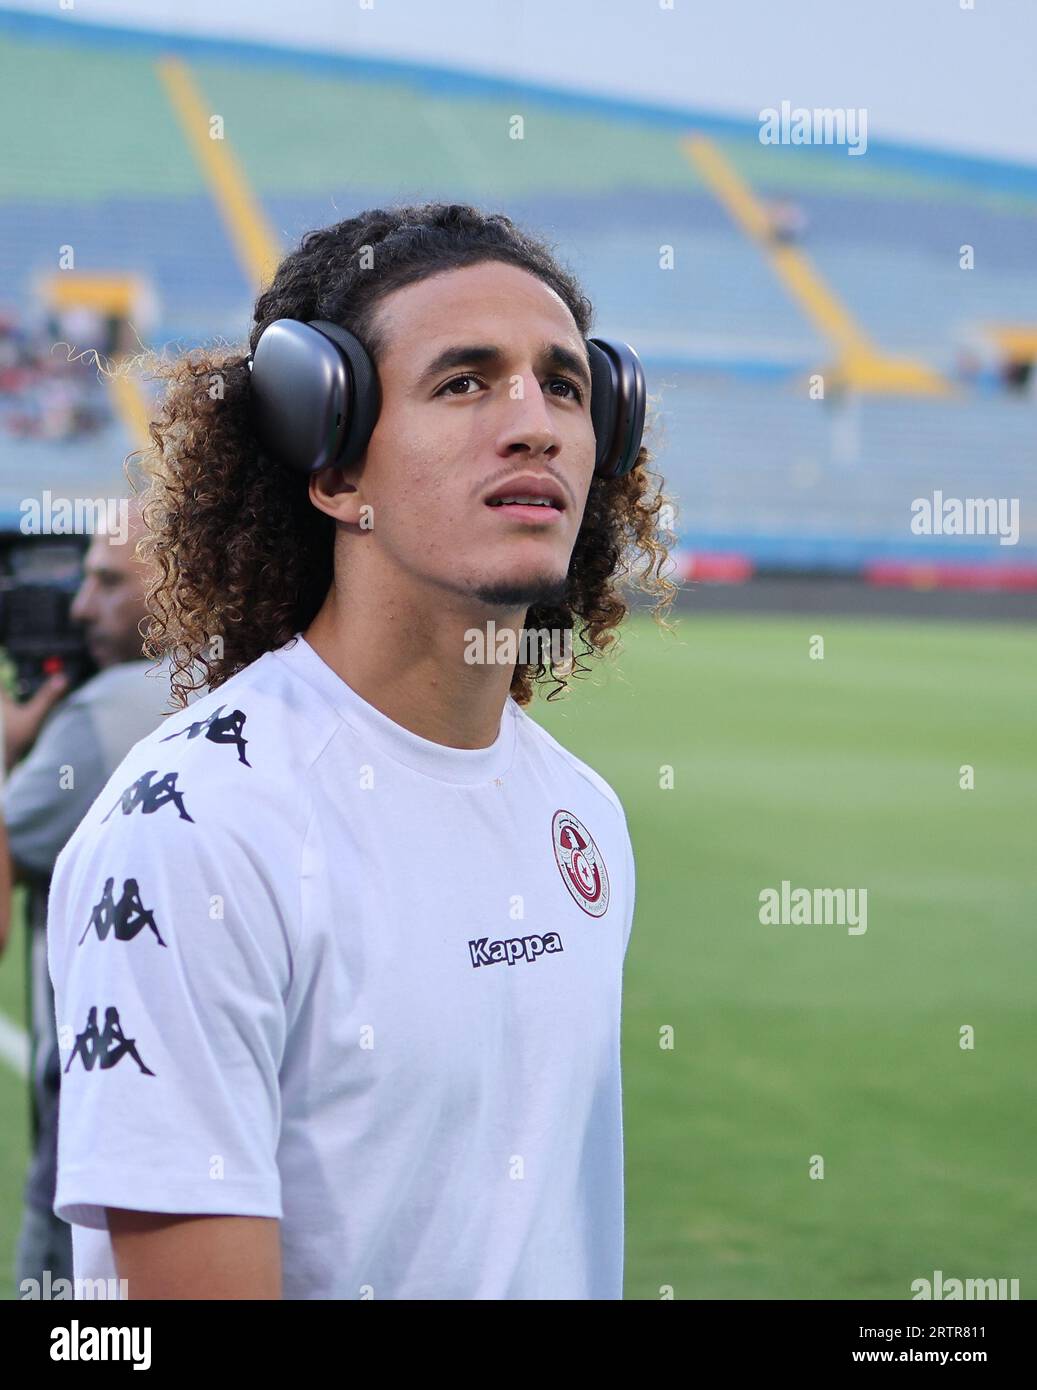 Egypt, Cairo - 12 September 2023 - Hannibal Mejbri of Tunisia with headphone during friendly international match between Egypt and Tunisia at 30th Jun Stock Photo